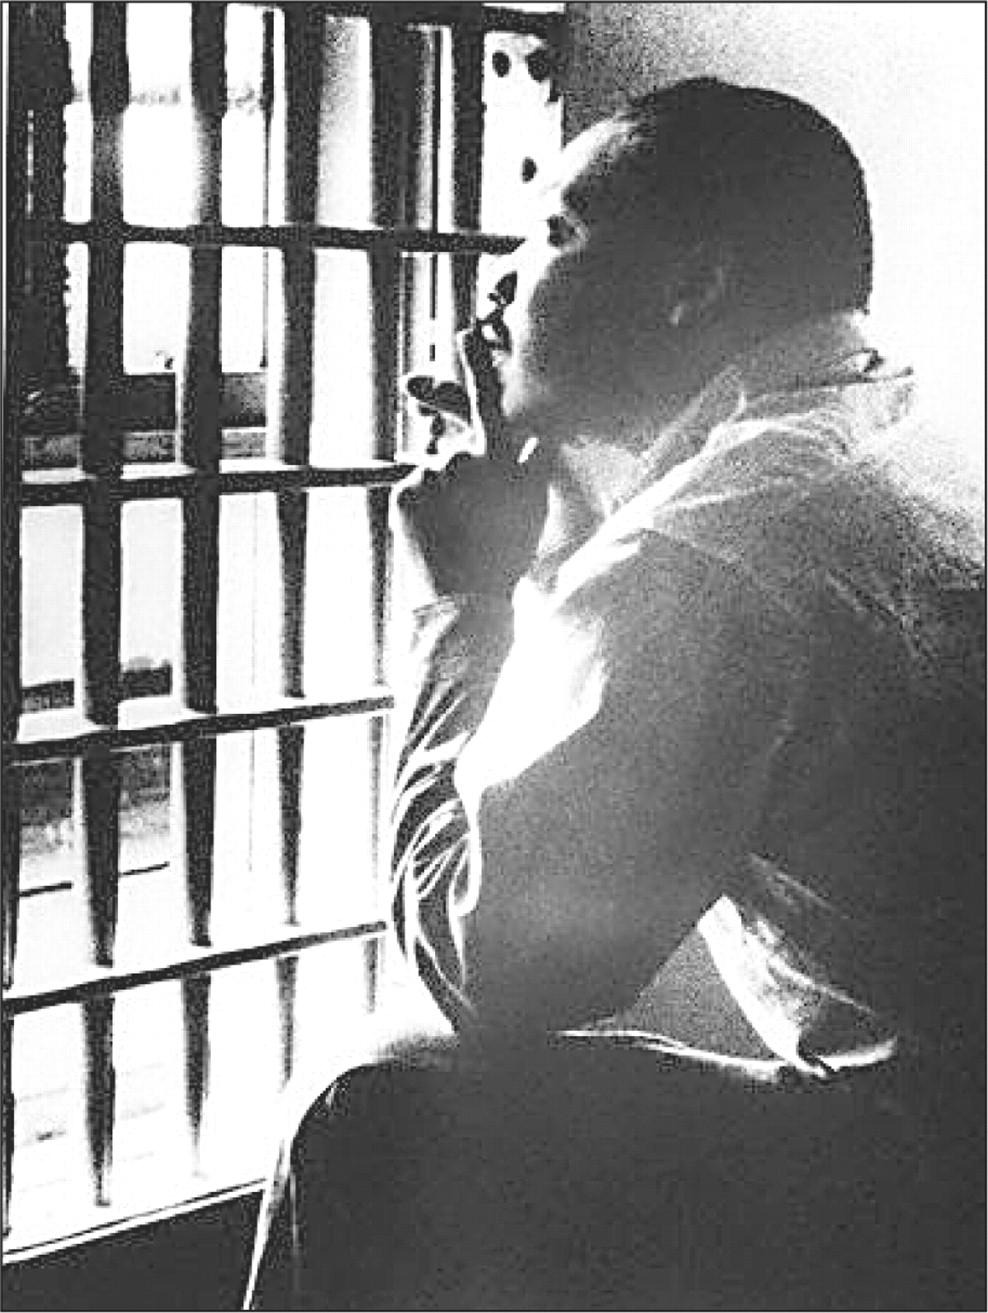 Where was Martin Luther King, Jr. arrested?